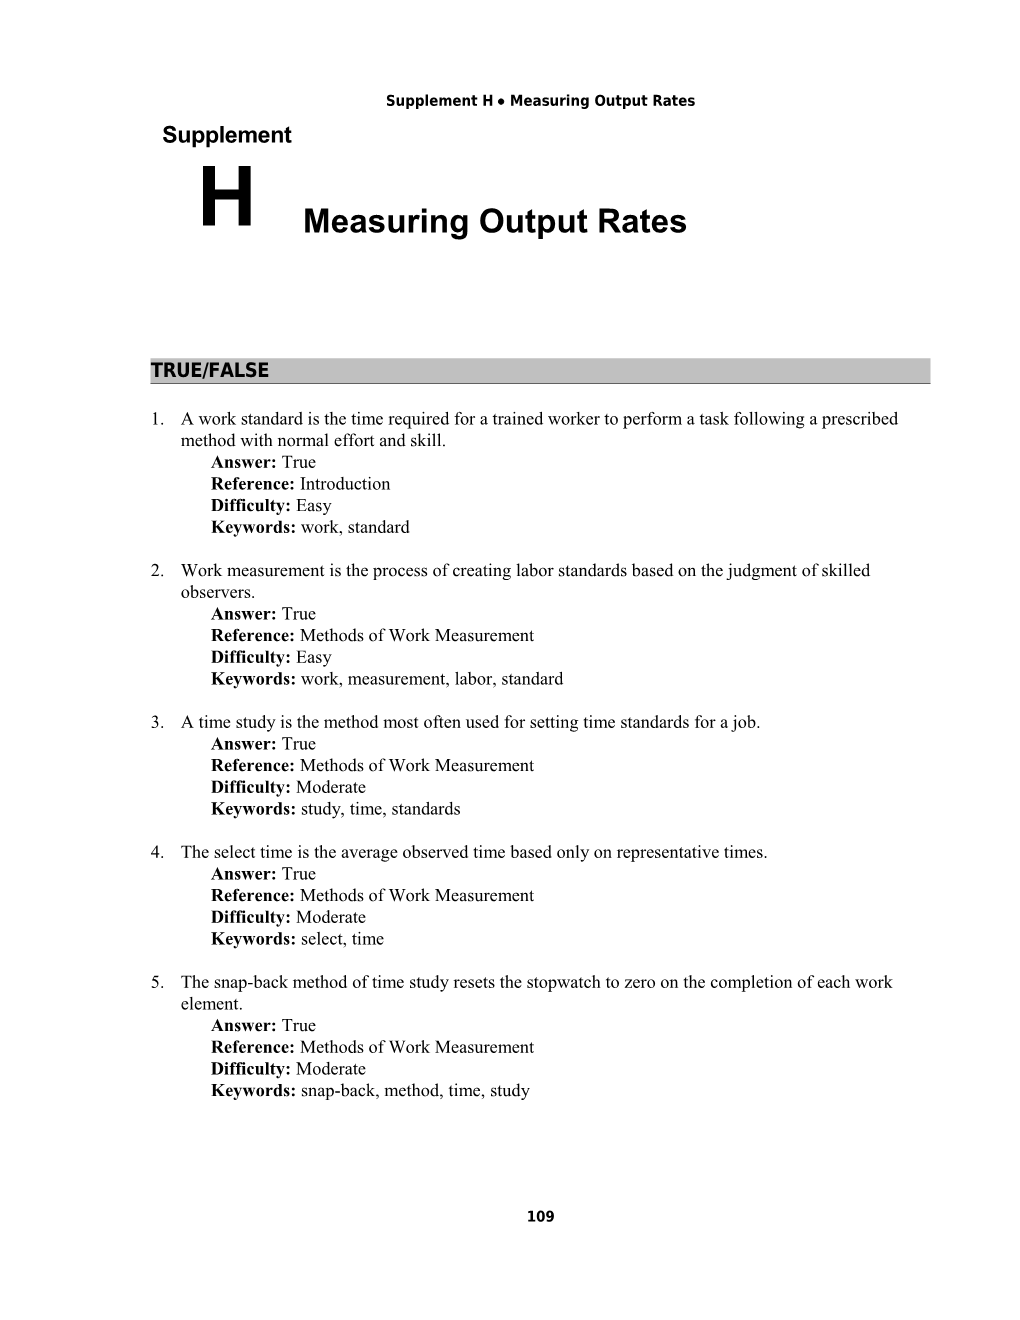 Supplement H Measuring Output Rates